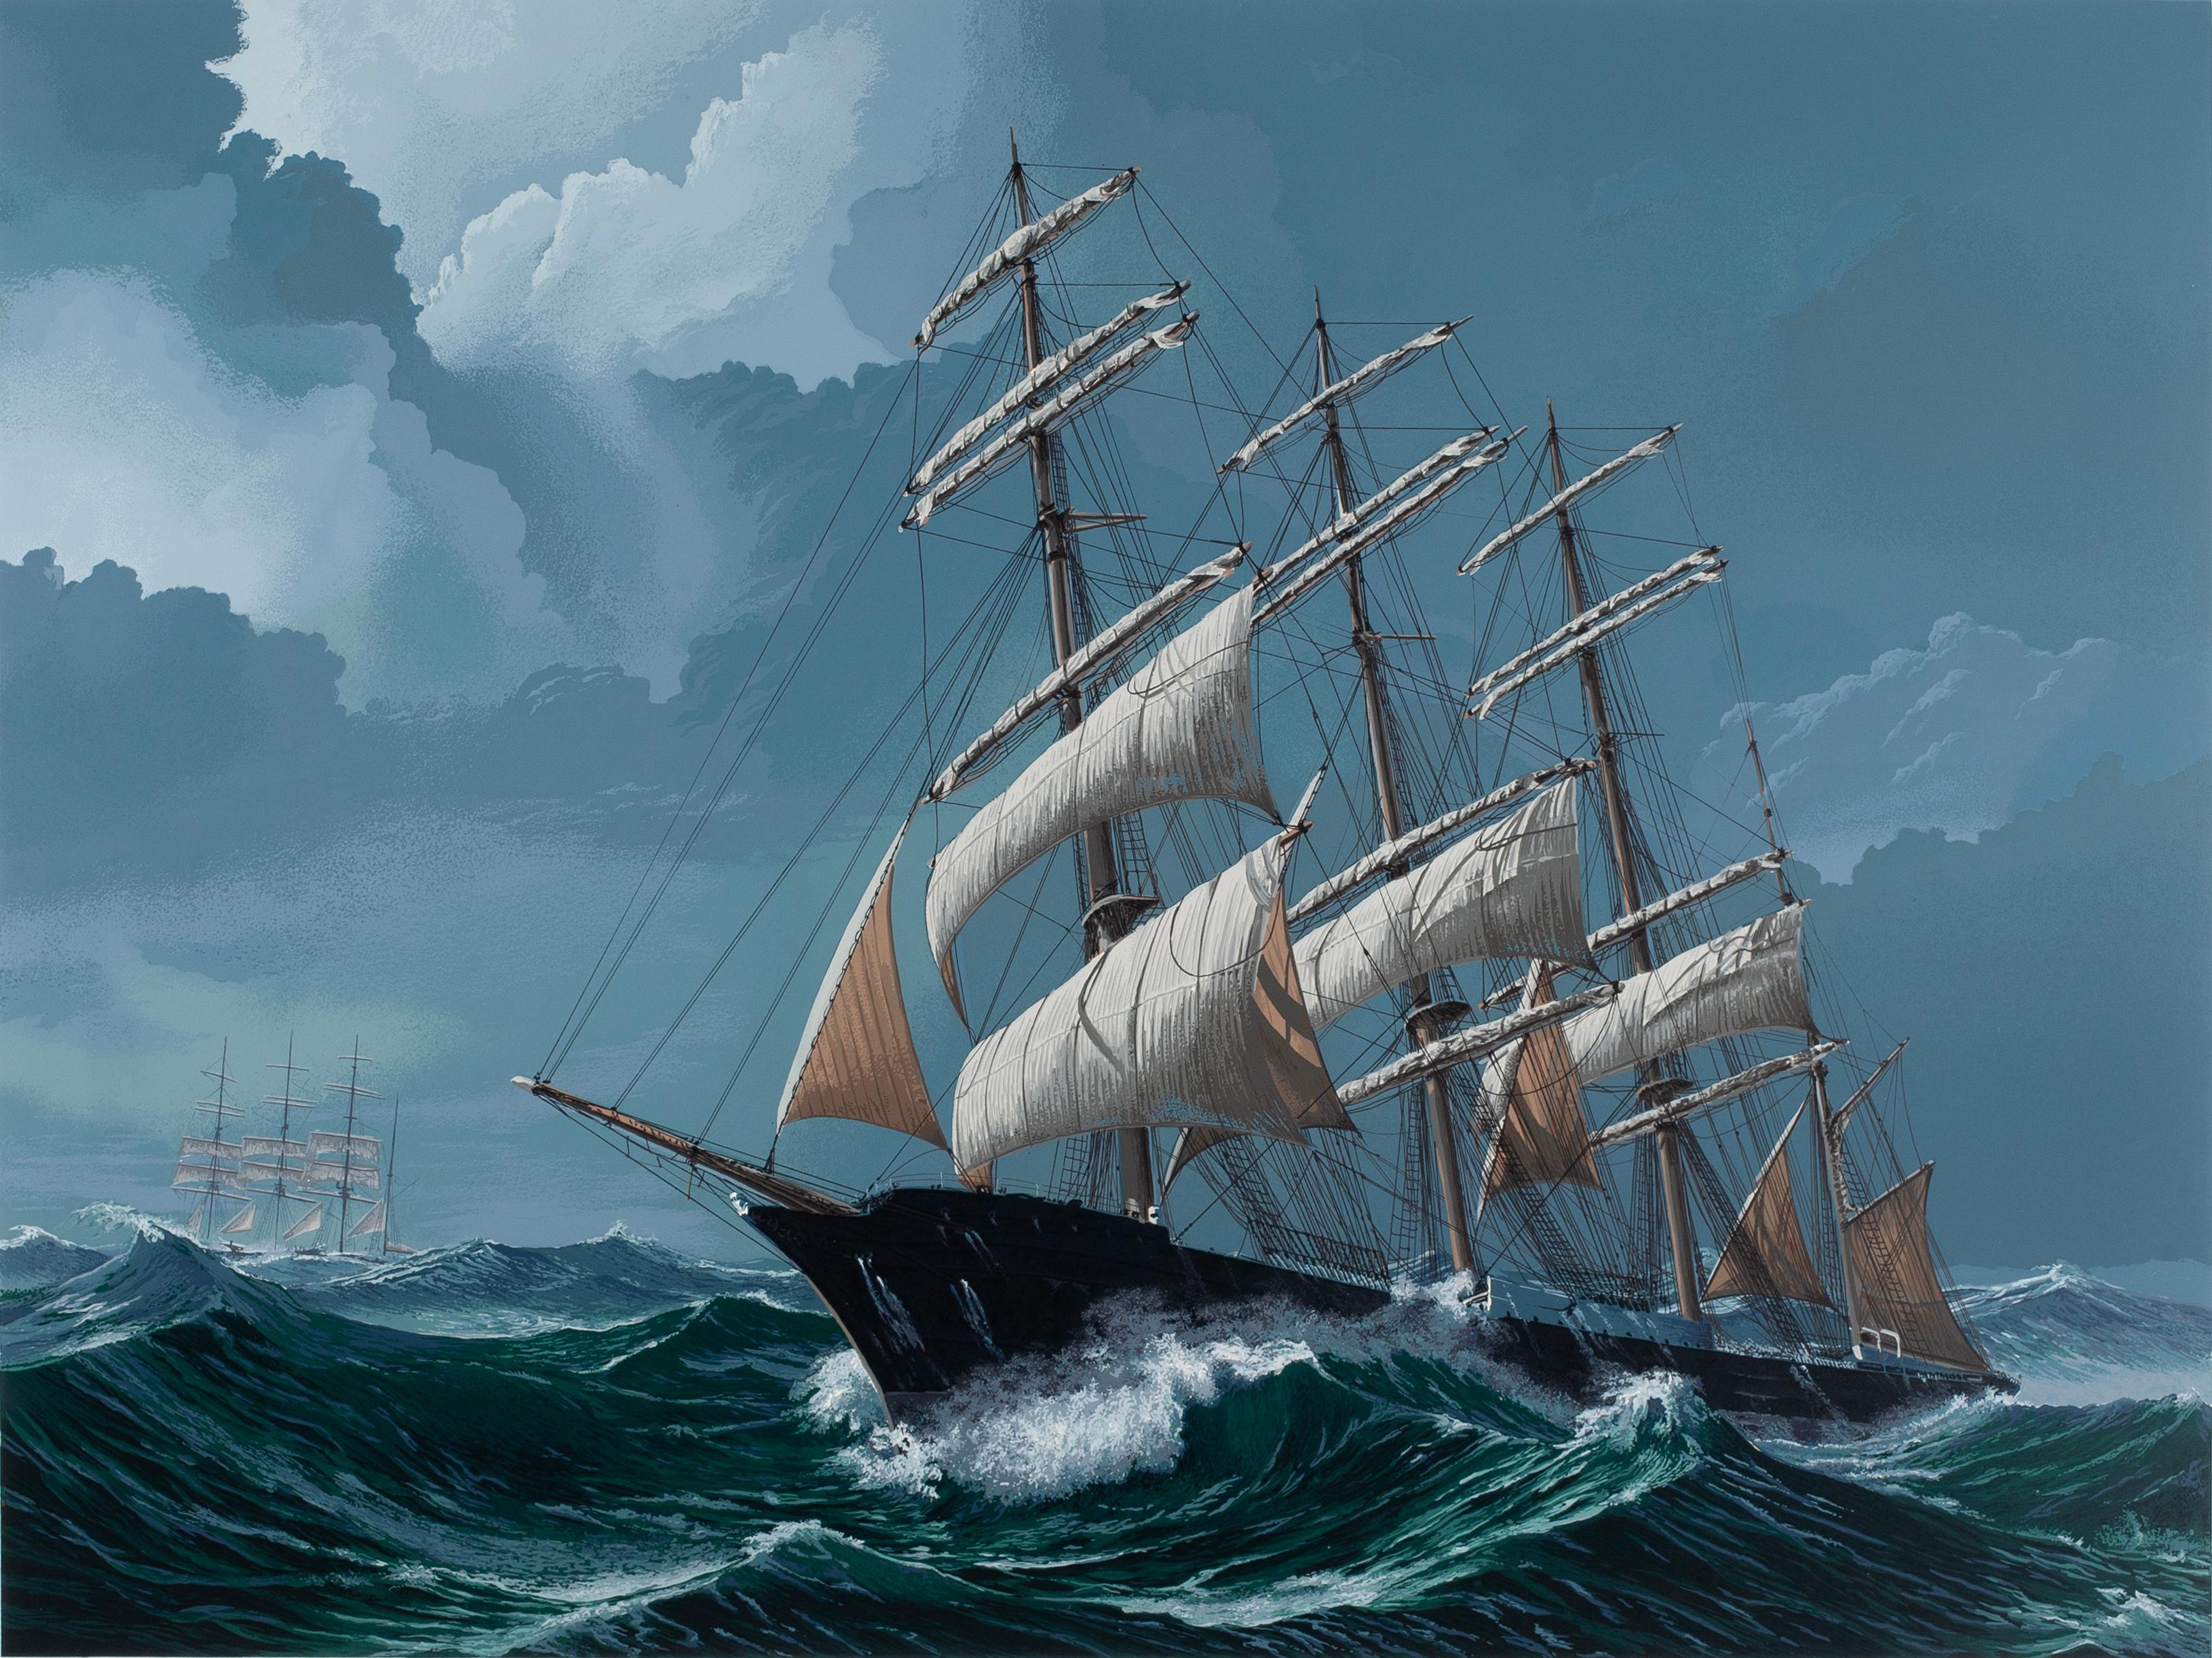 Against the Angry Sea - Painting by Pete Peterson